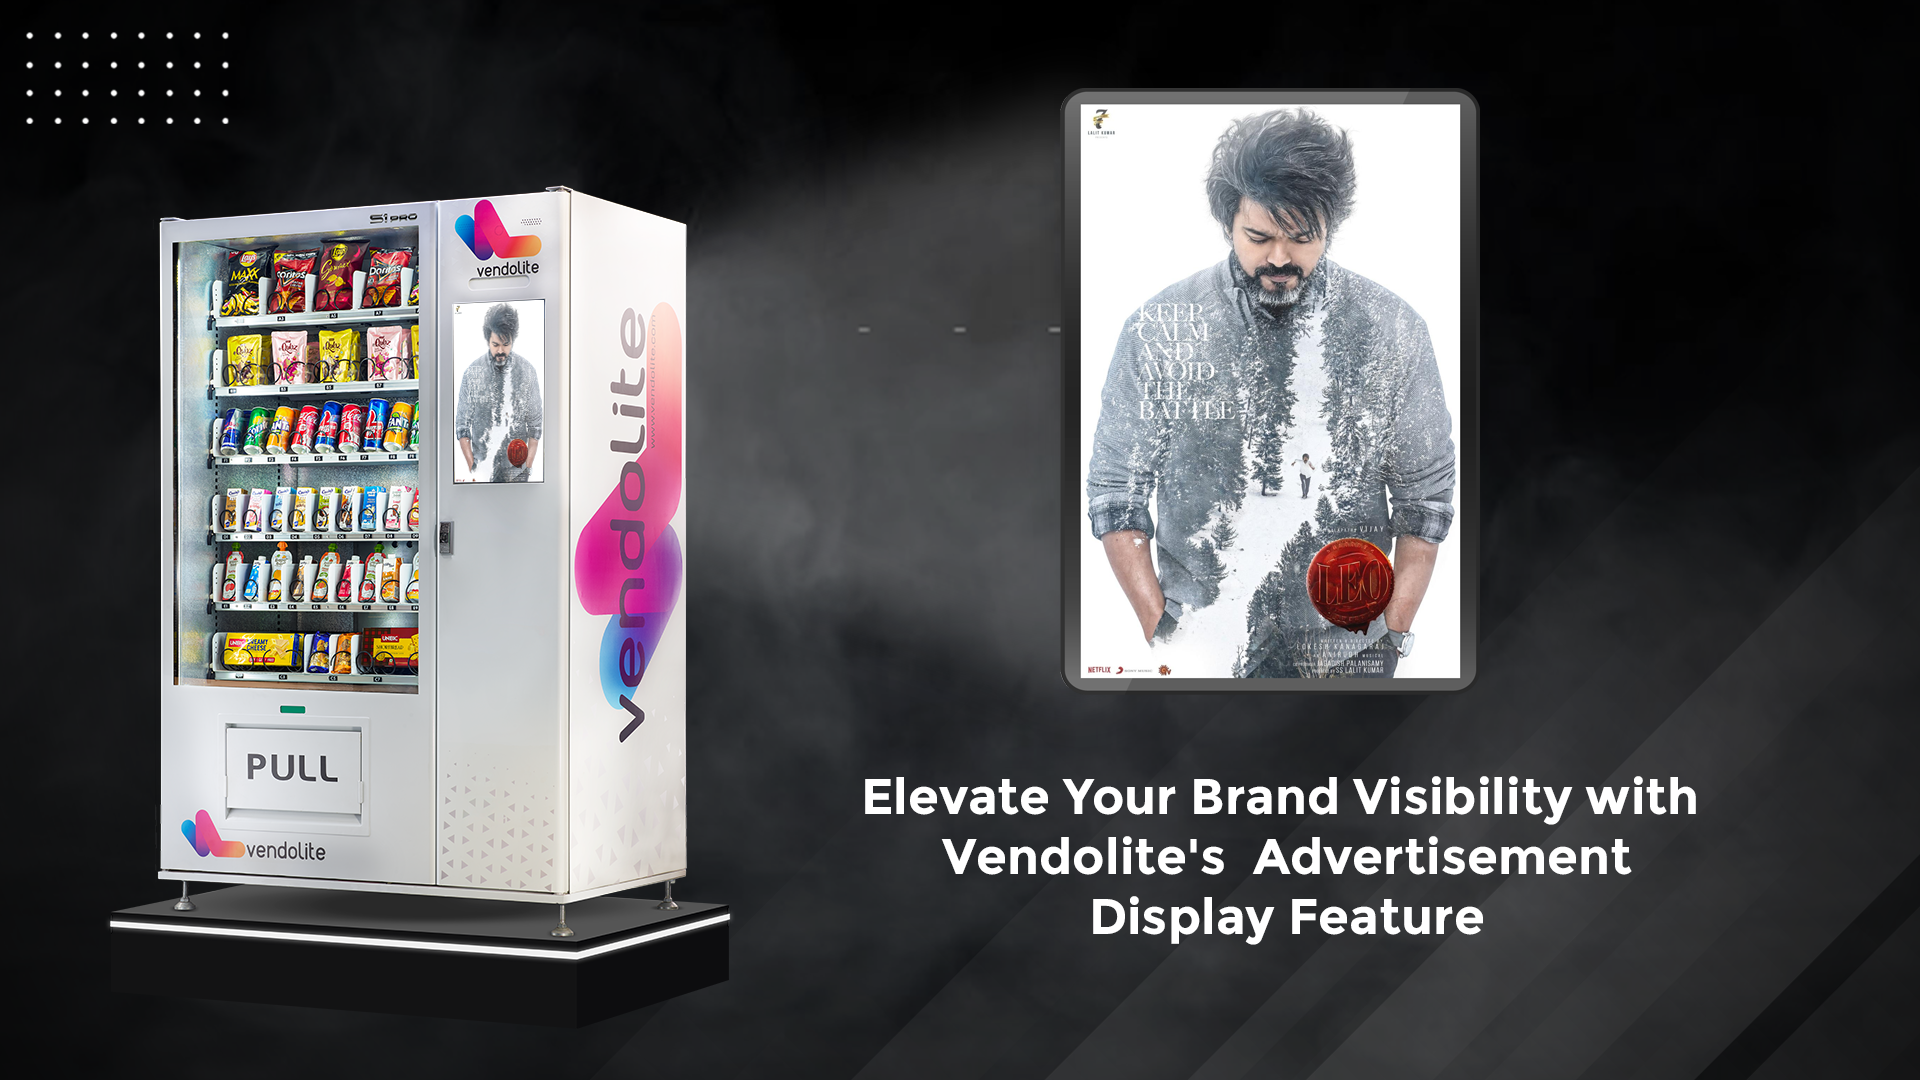 Elevate Your Brand Visibility with Vendolite's Advertisement Display Feature